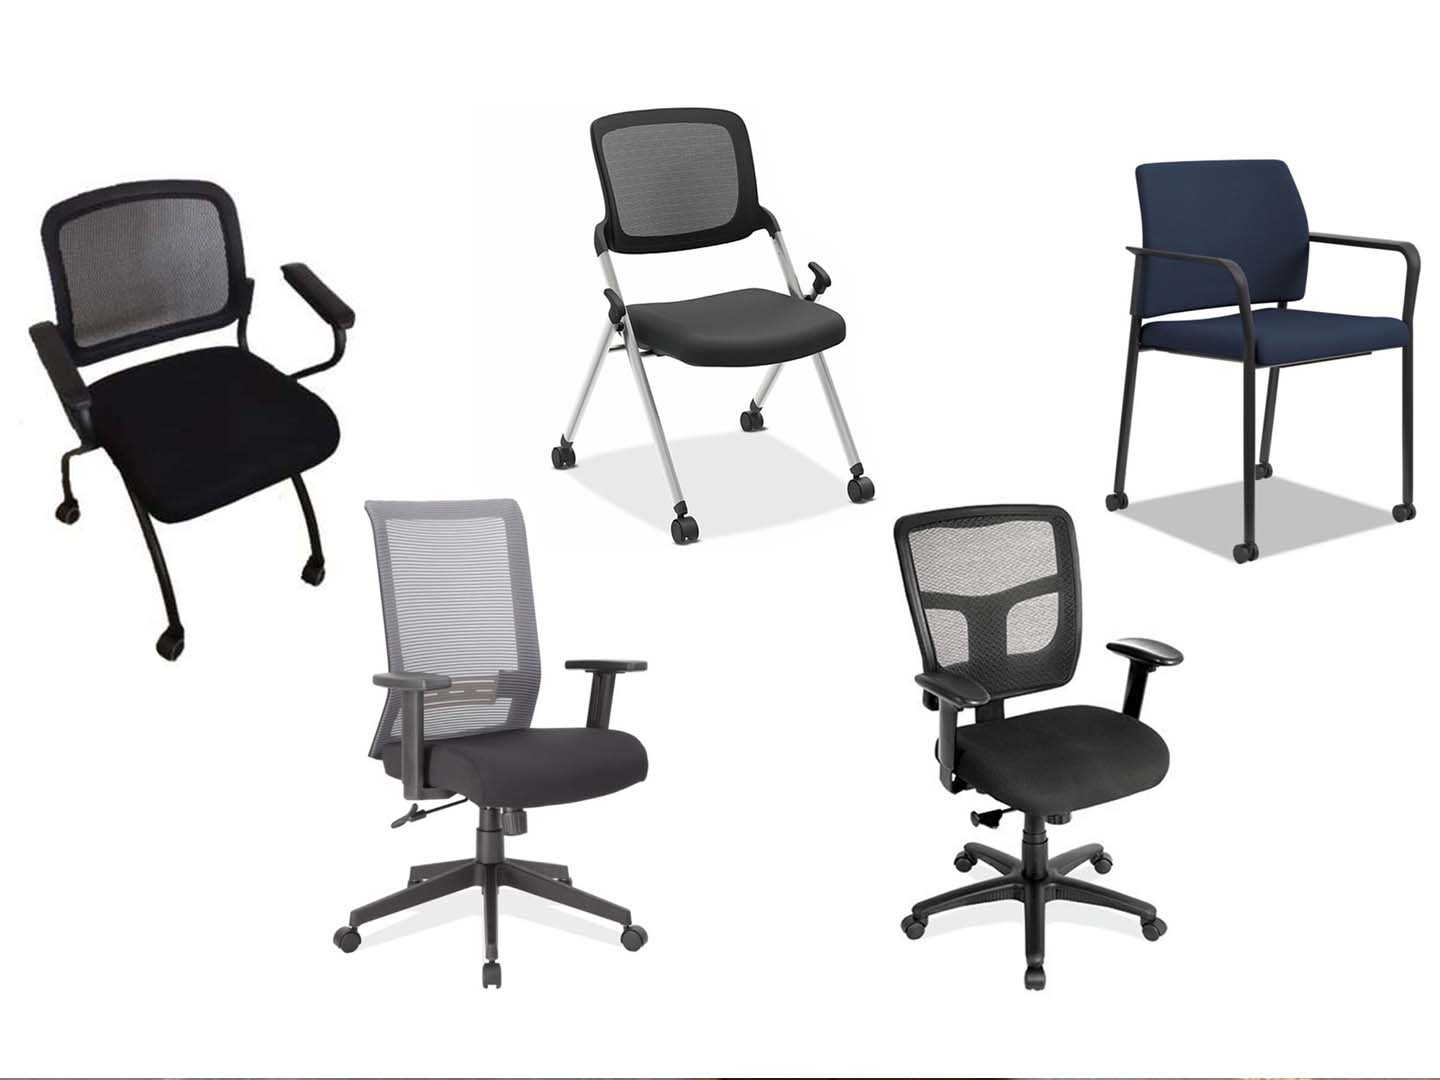 https://tristateofficefurniture.com/wp-content/uploads/2022/04/used-office-chairs-4x3-1.jpg